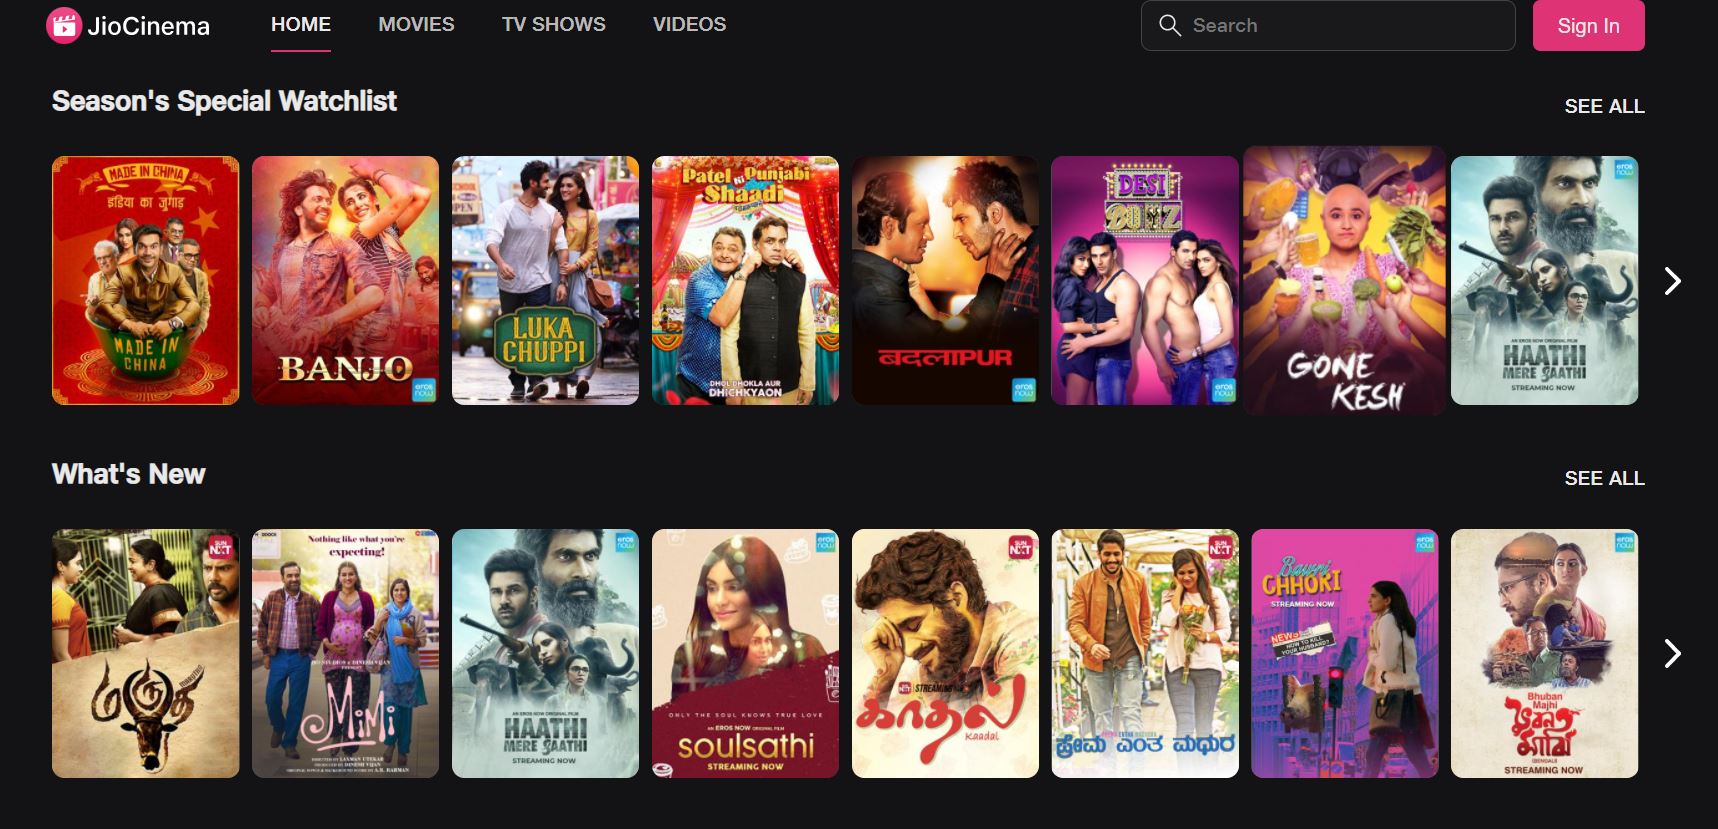 Latest Movies, TV Shows, Web Series & Music Videos Available On Jio Cinema For Laptop To Watch Online